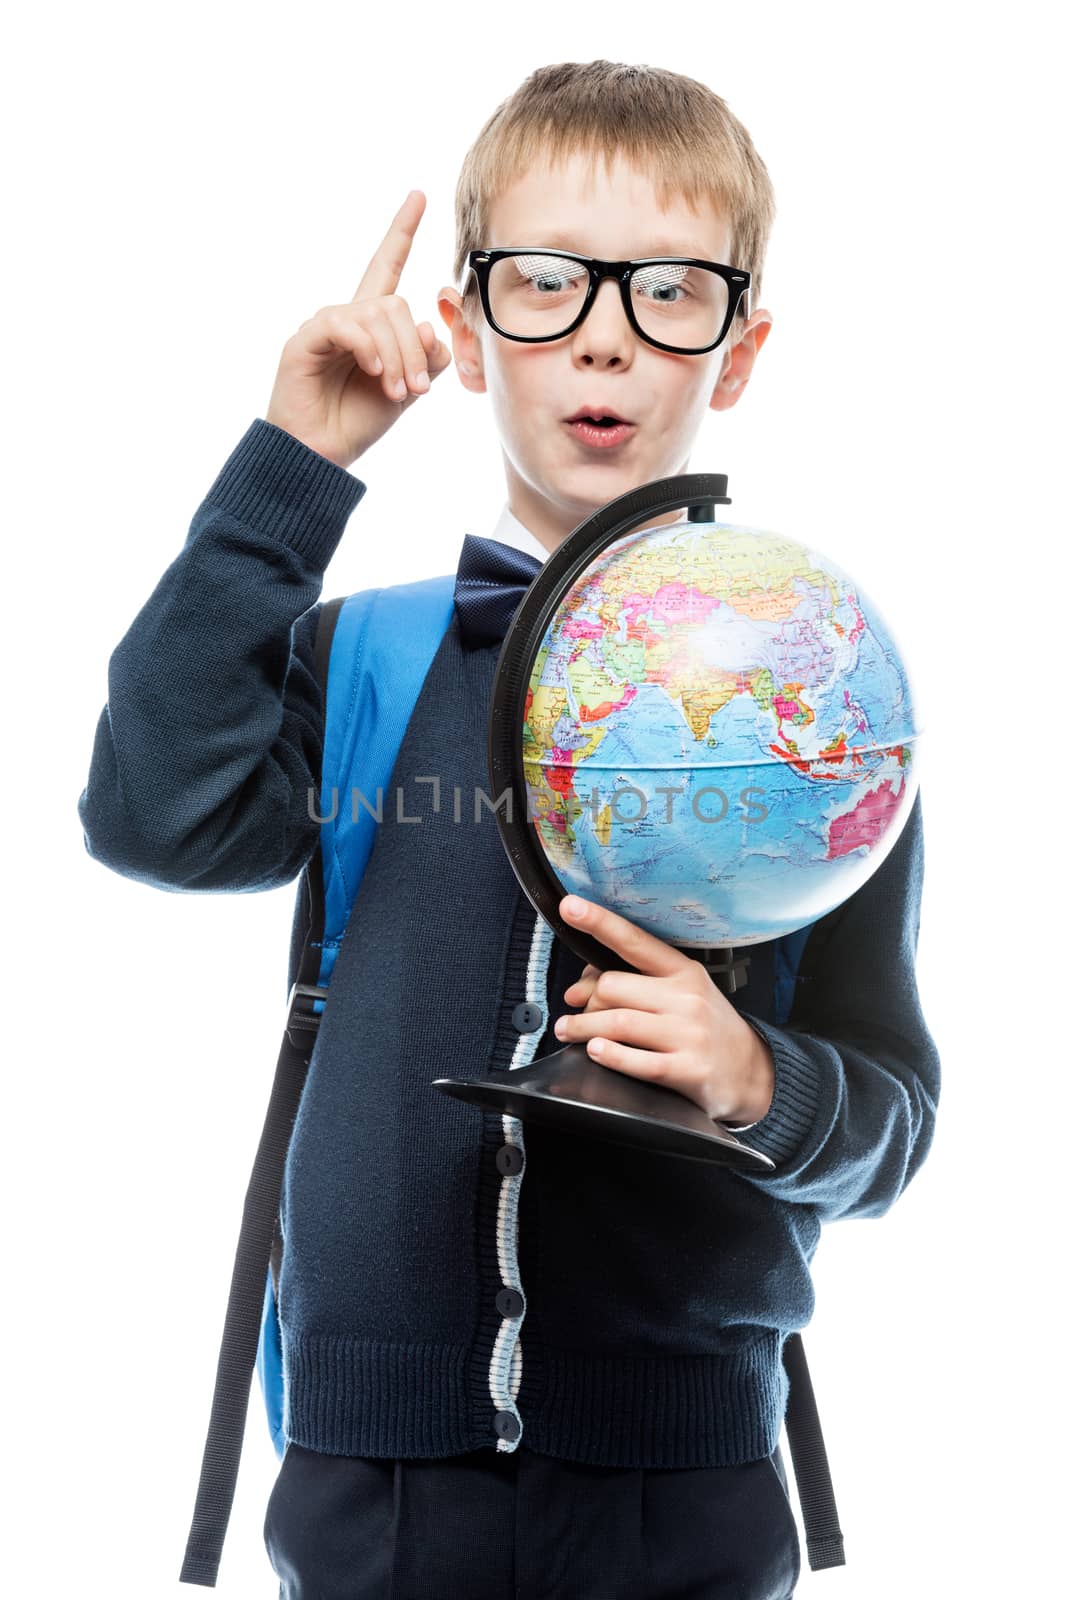 emotional schoolboy with globe has a good idea, portrait is isolated on white background